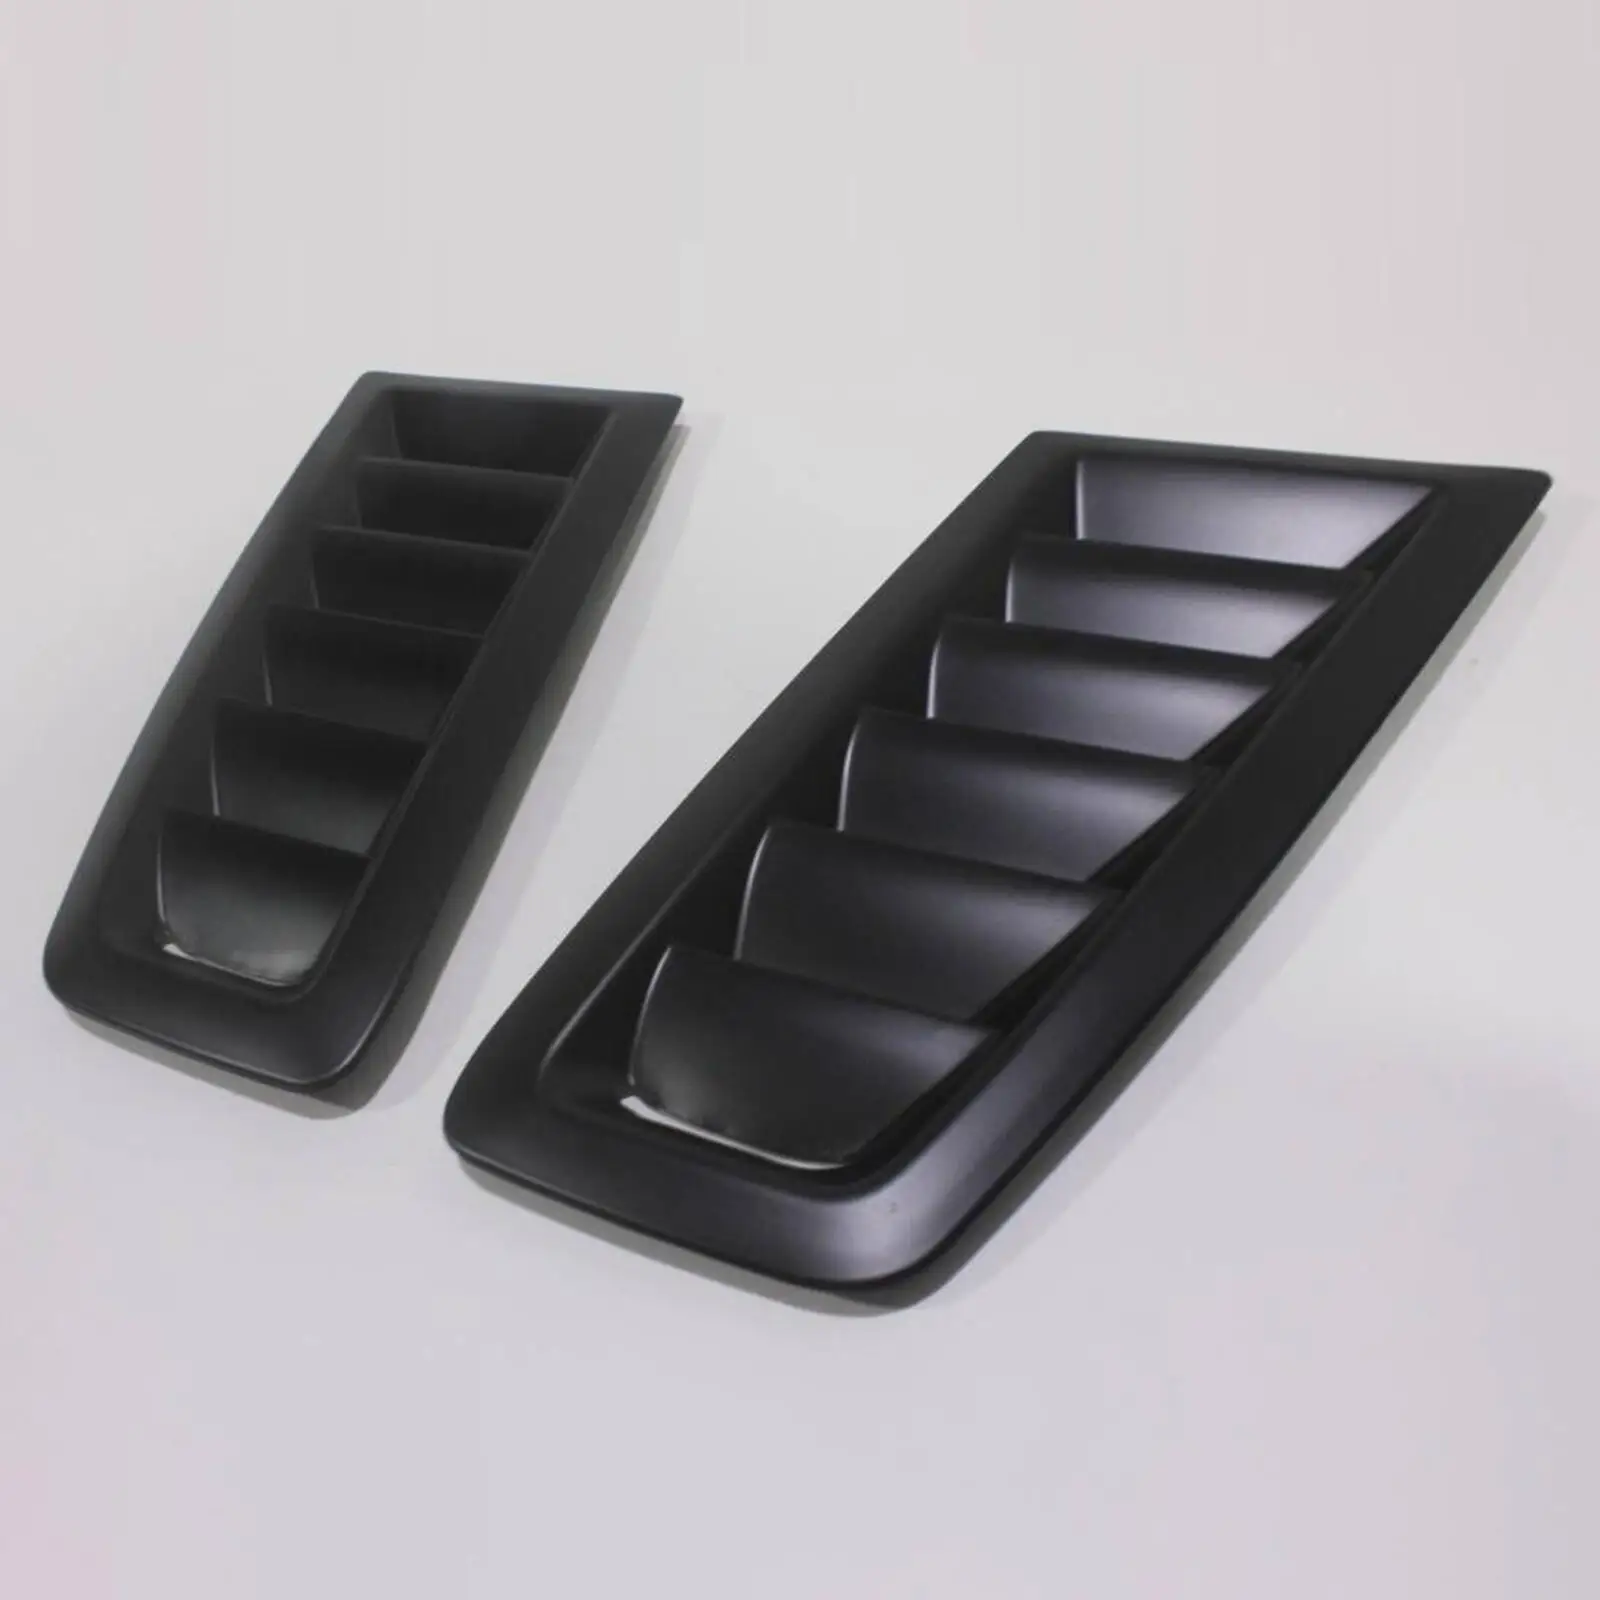 2x Bonnet Air Vent Hood Cover Car Hood Vent Scoop Kit for Ford Focus RS